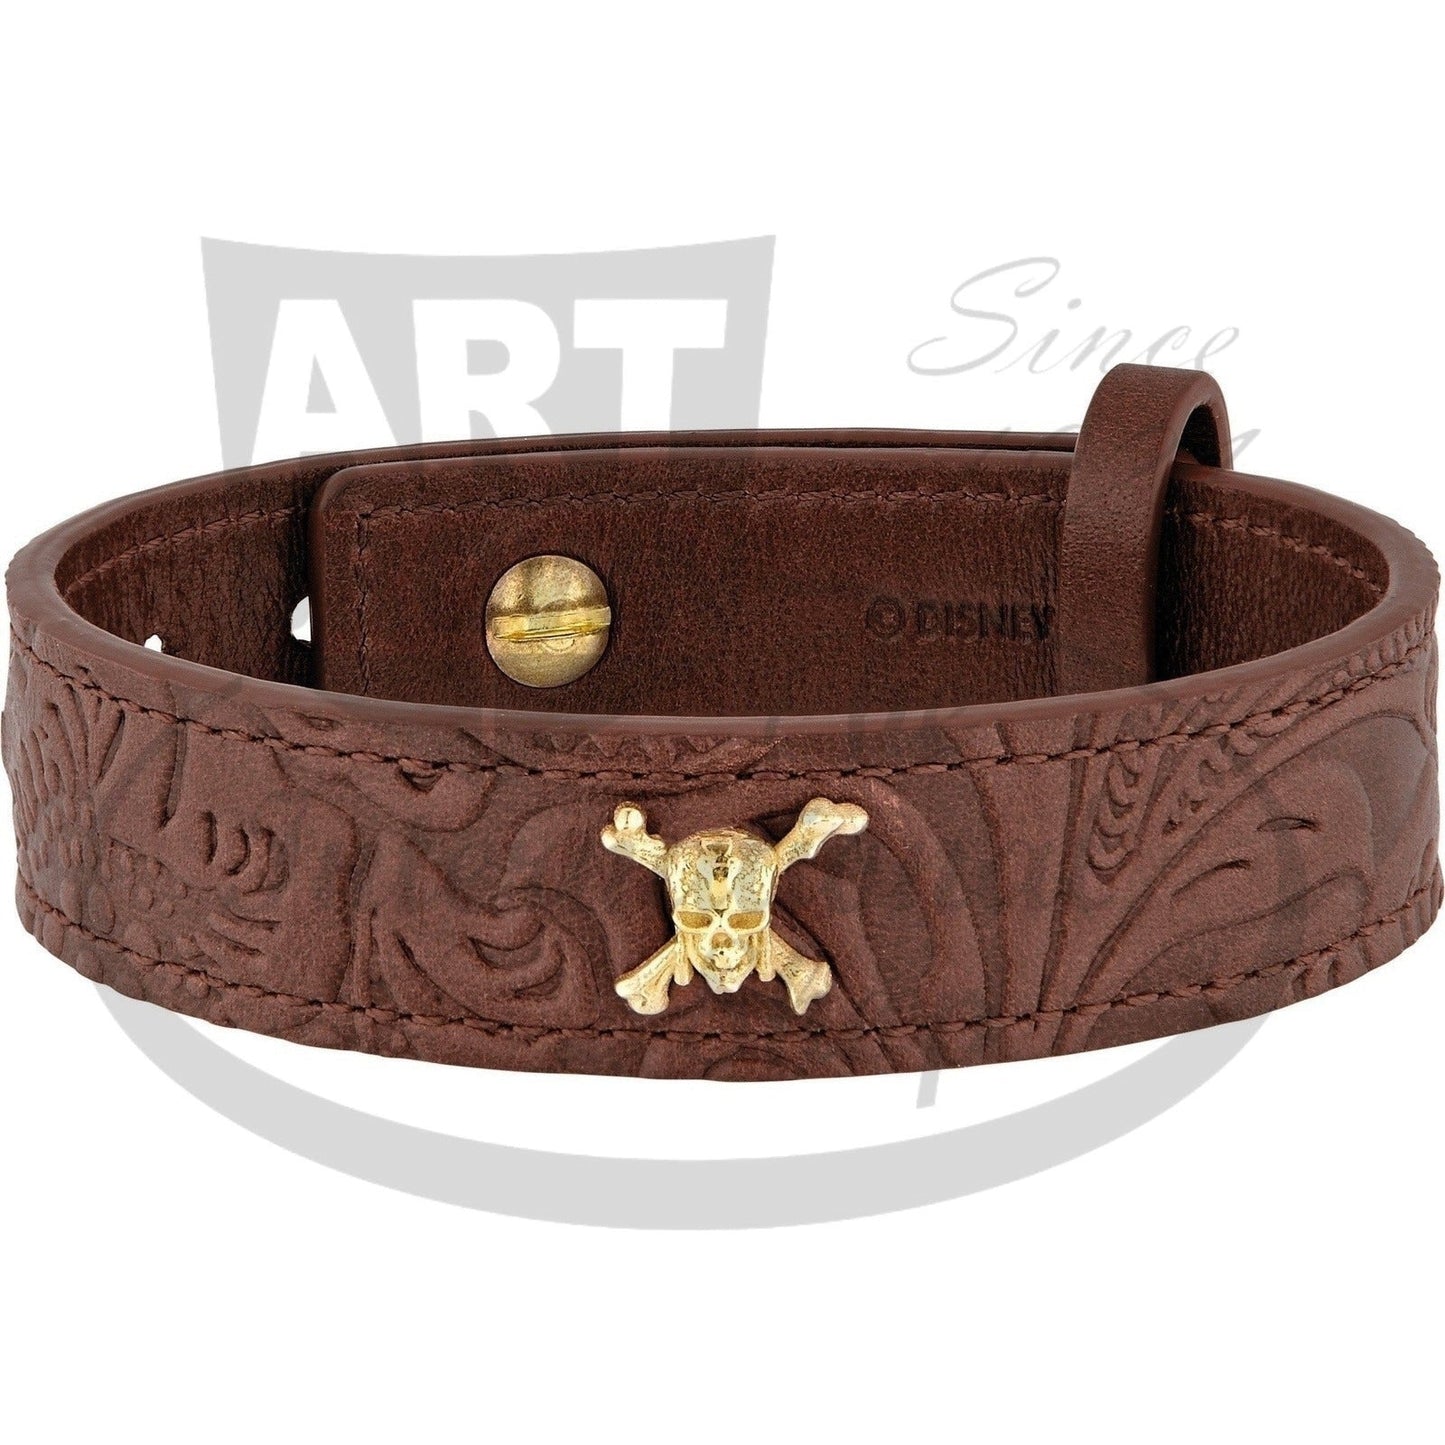 ST Dupont Pirates of the Caribbean Leather Bracelet